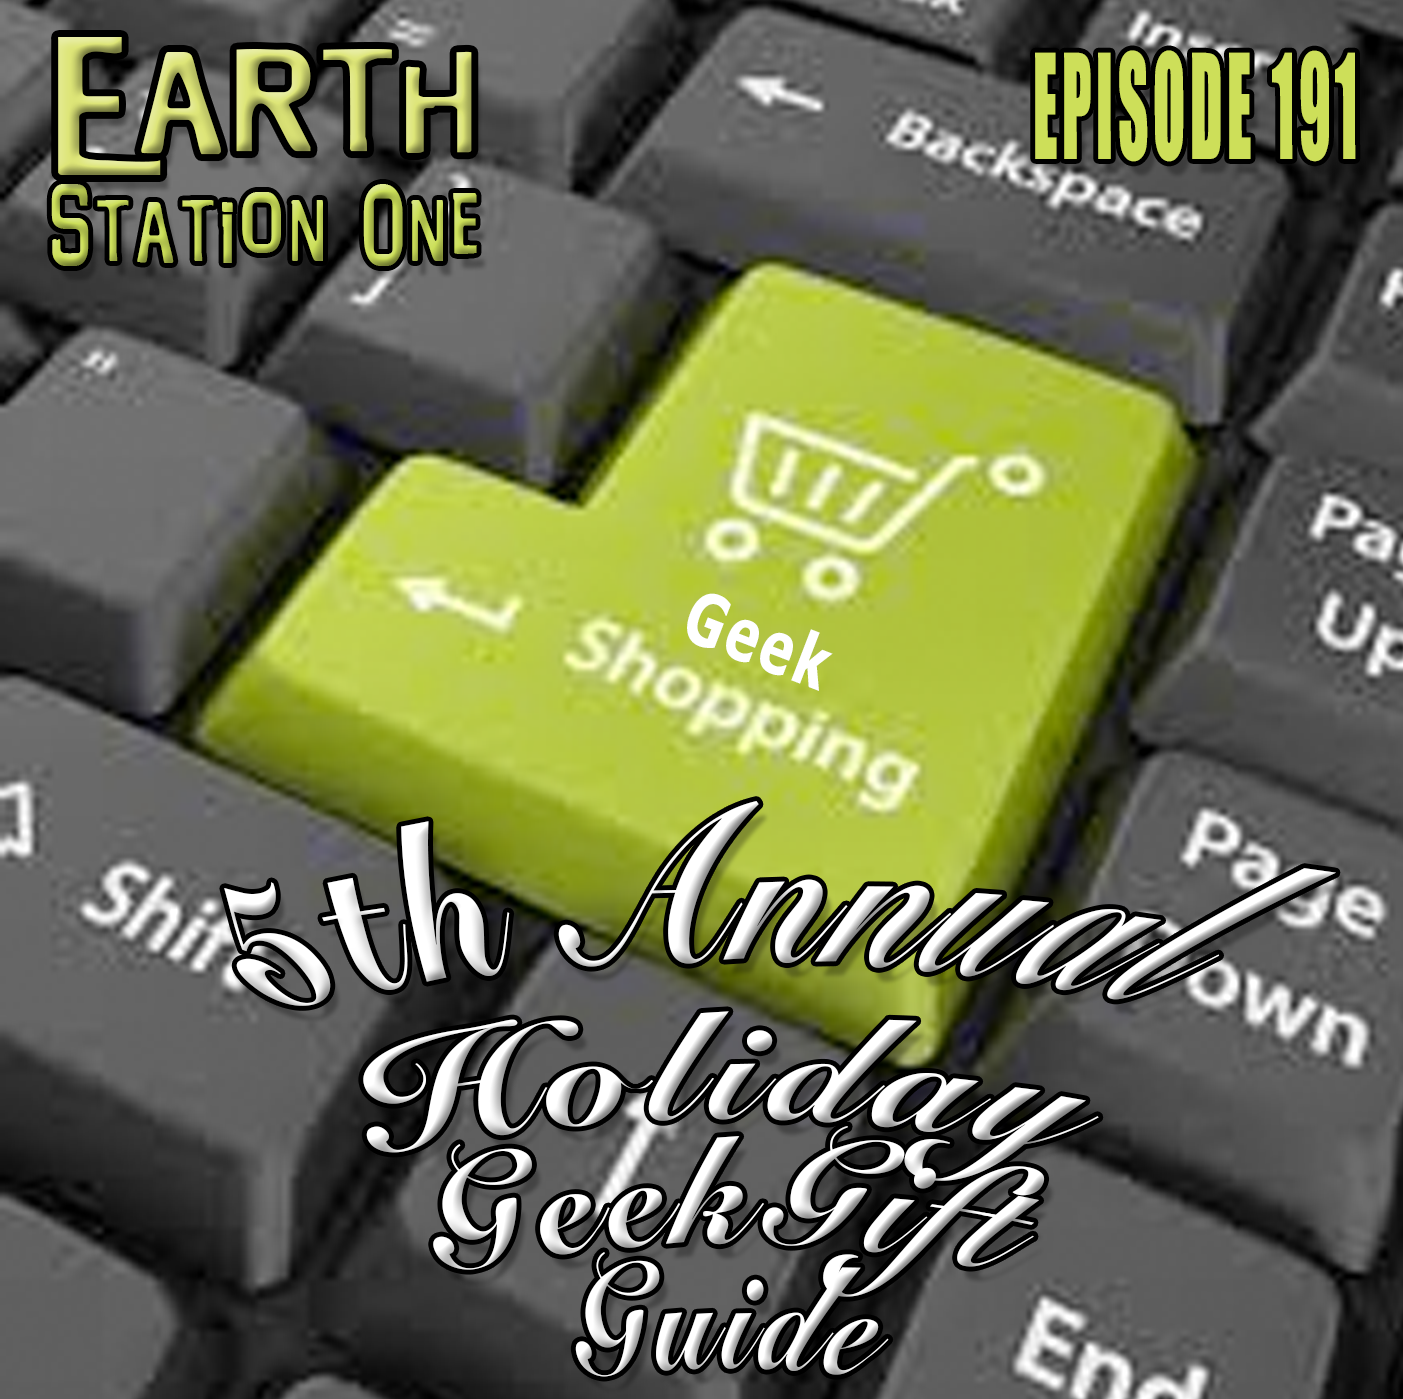 Earth Station One Episode 191